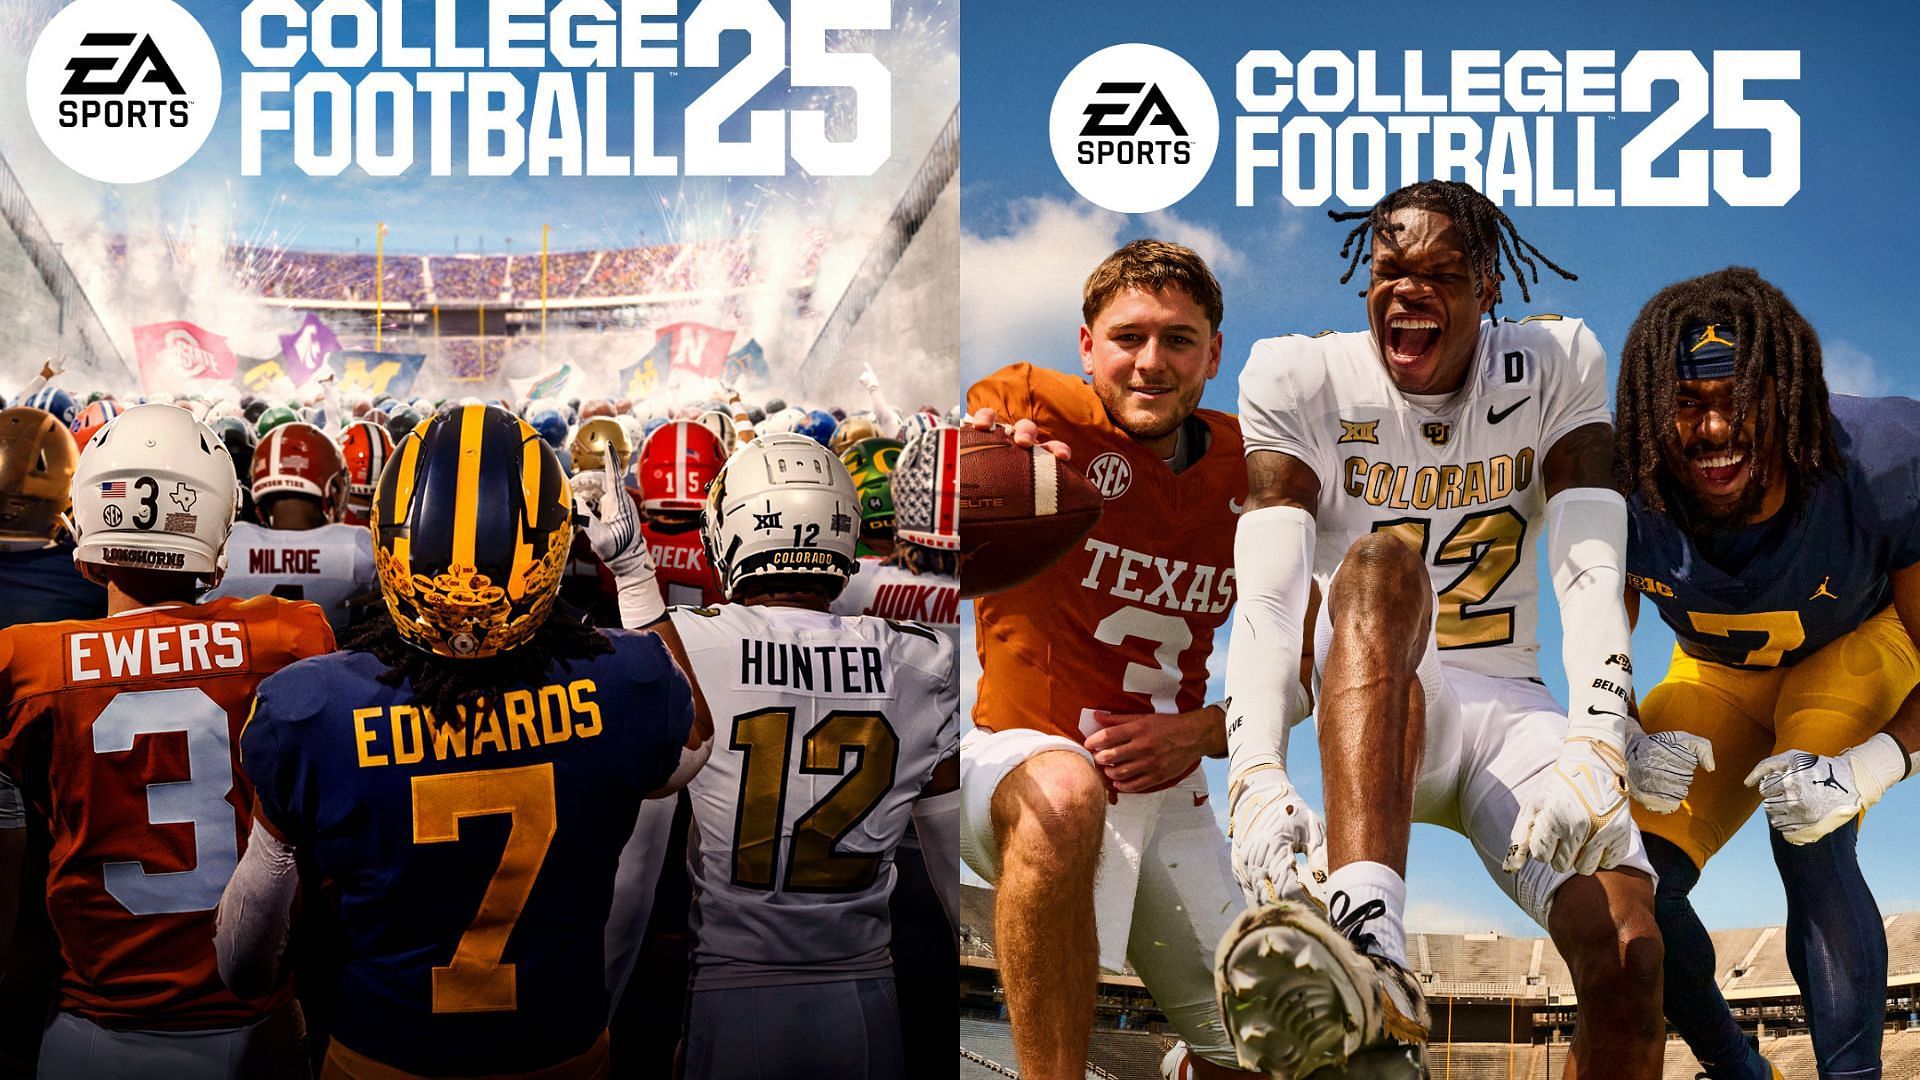 EA Sports College Football 25 recently revealed the top rated offenses in the game